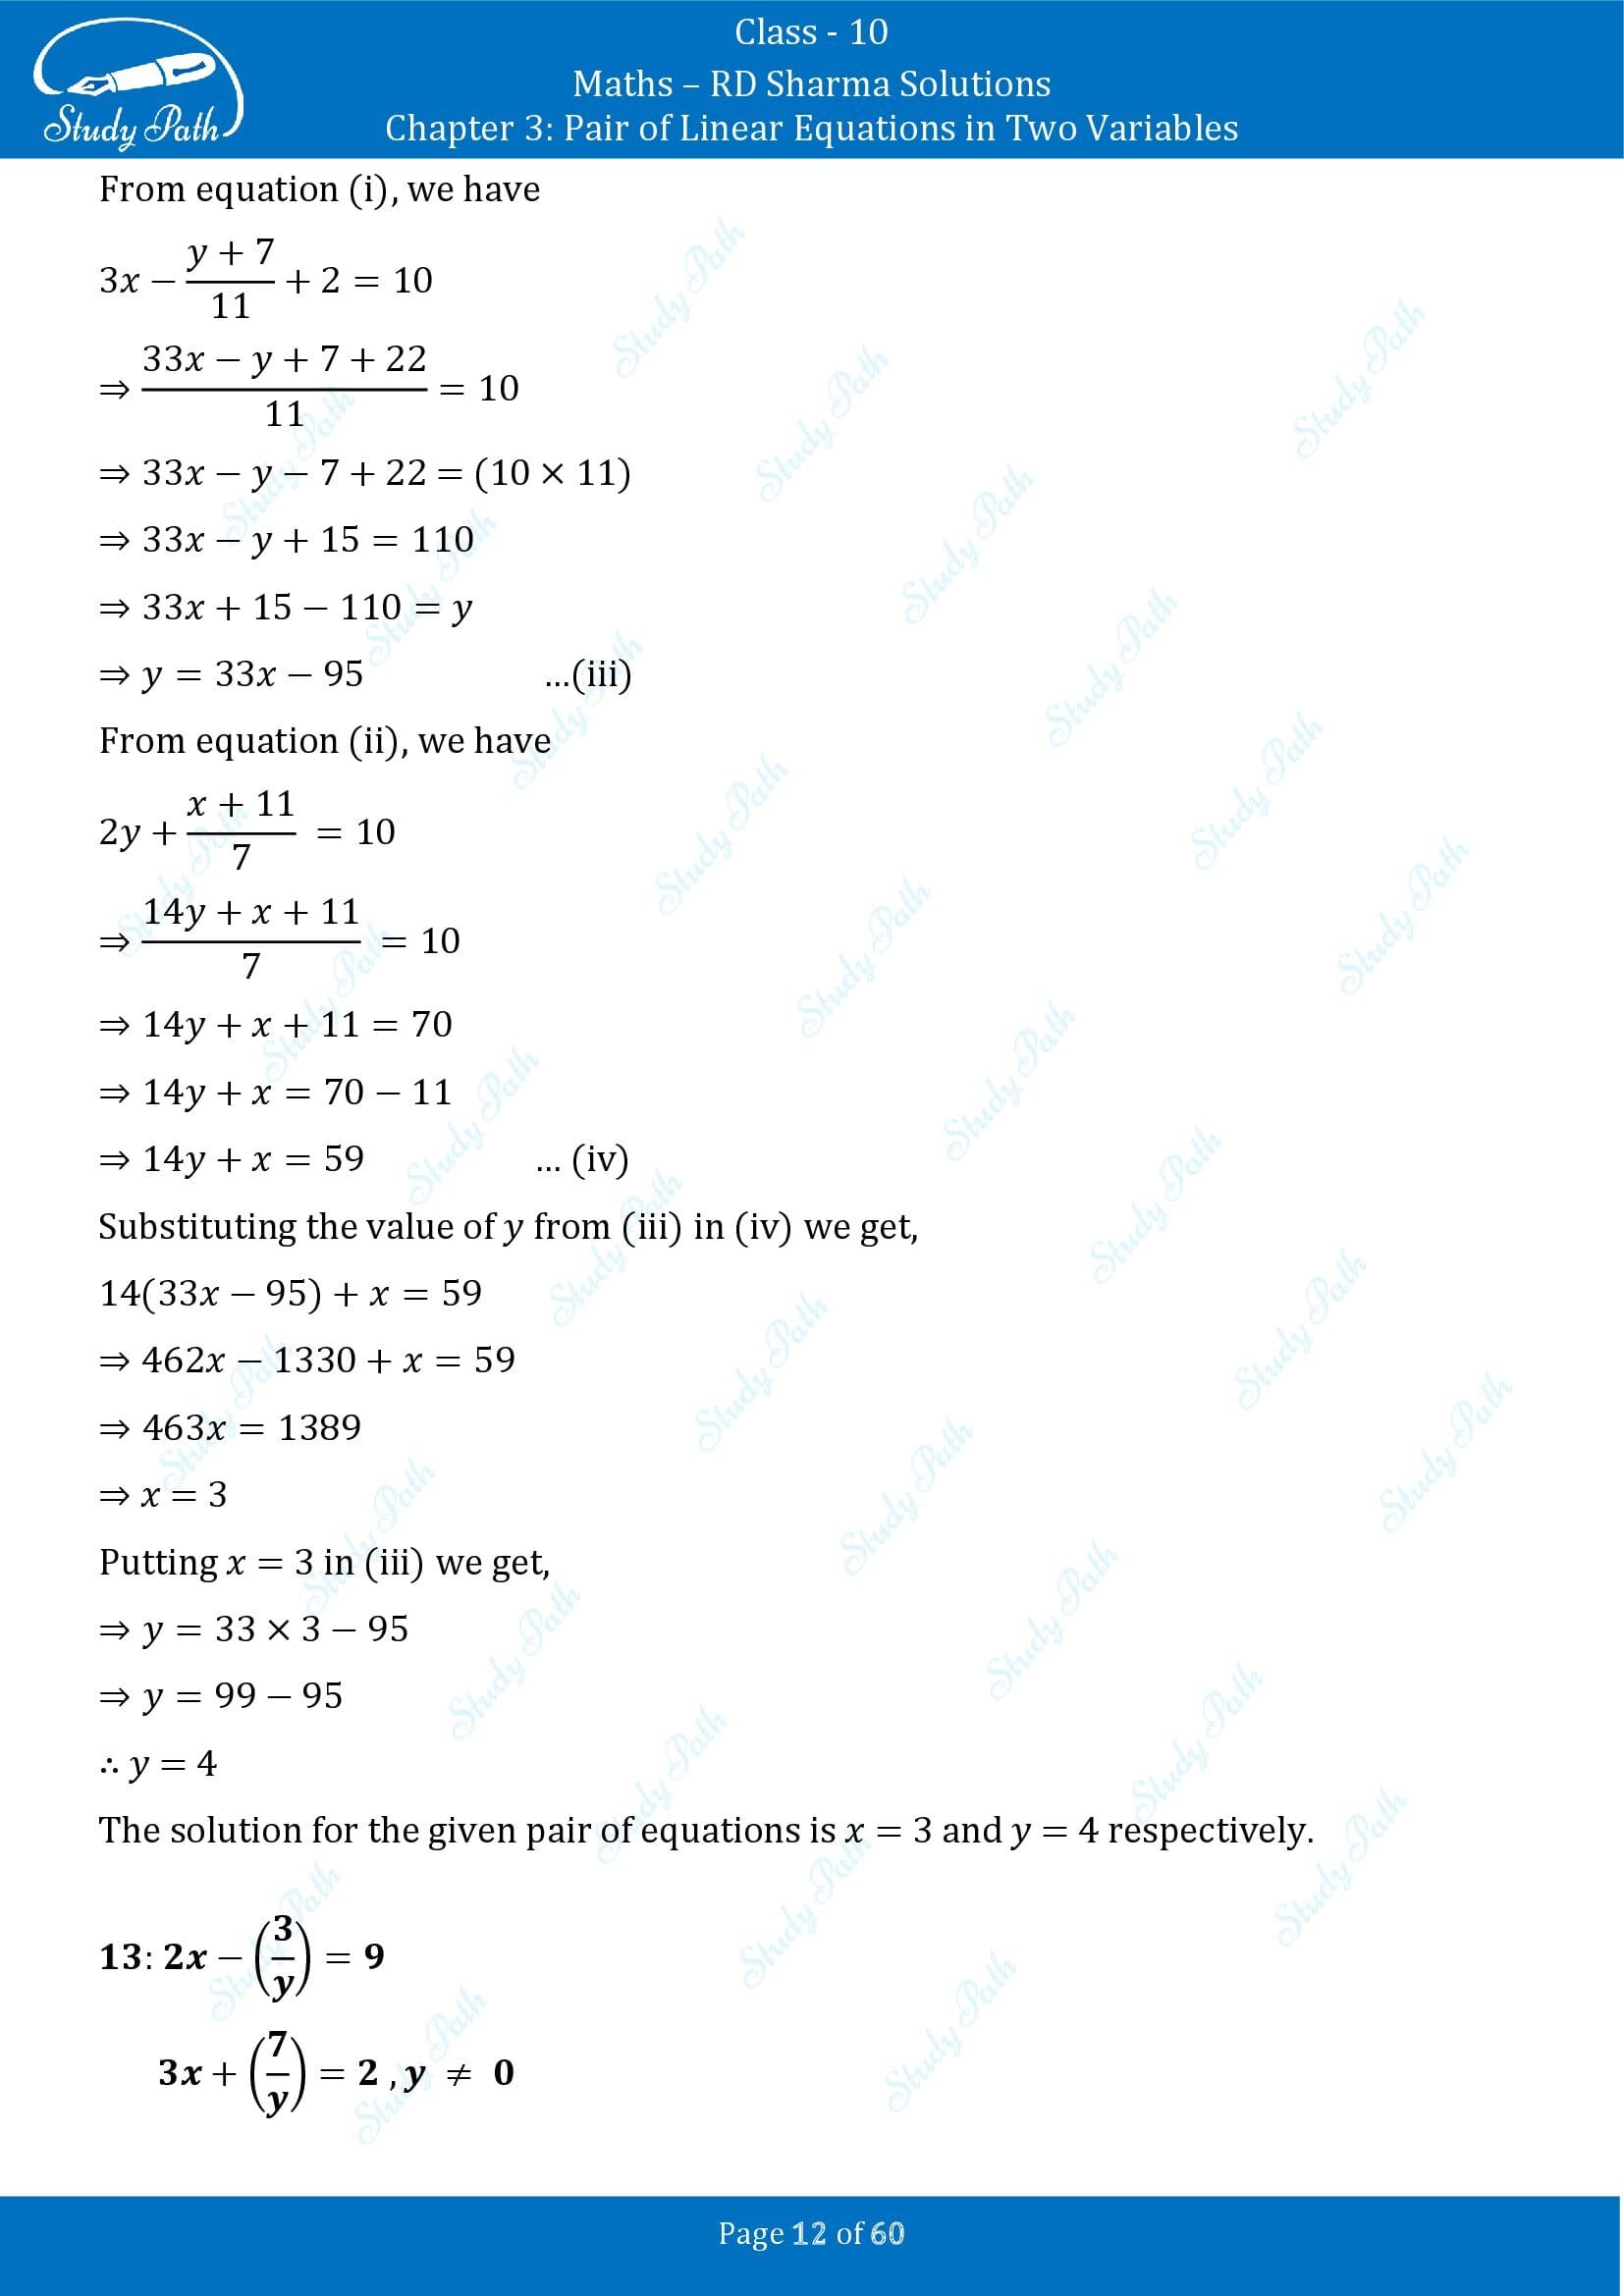 RD Sharma Solutions Class 10 Chapter 3 Pair of Linear Equations in Two Variables Exercise 3.3 00012